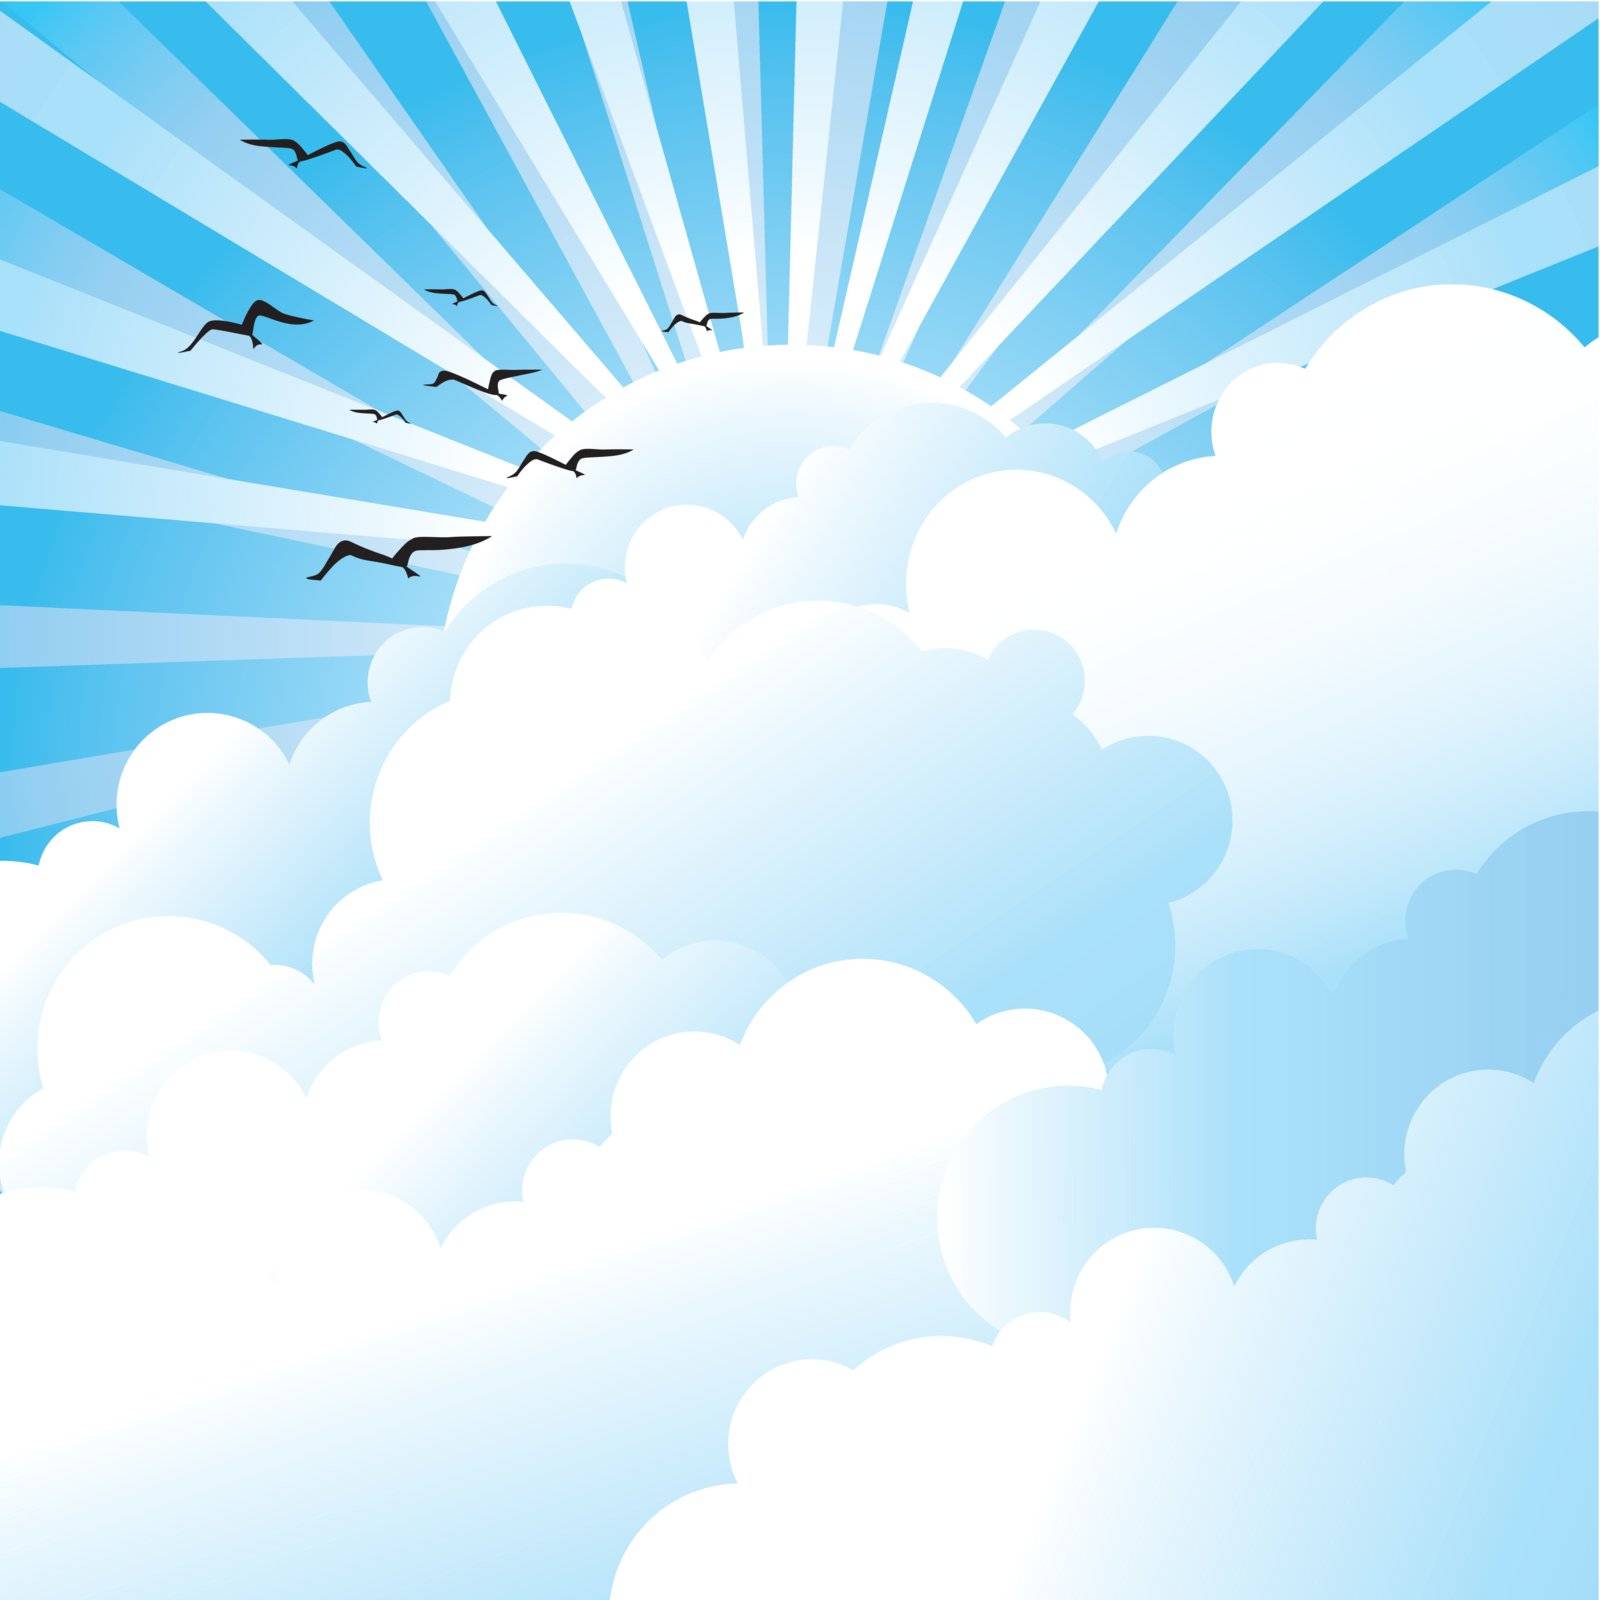 Vector illustration of a beautiful sunny sky with rays, clouds and birds